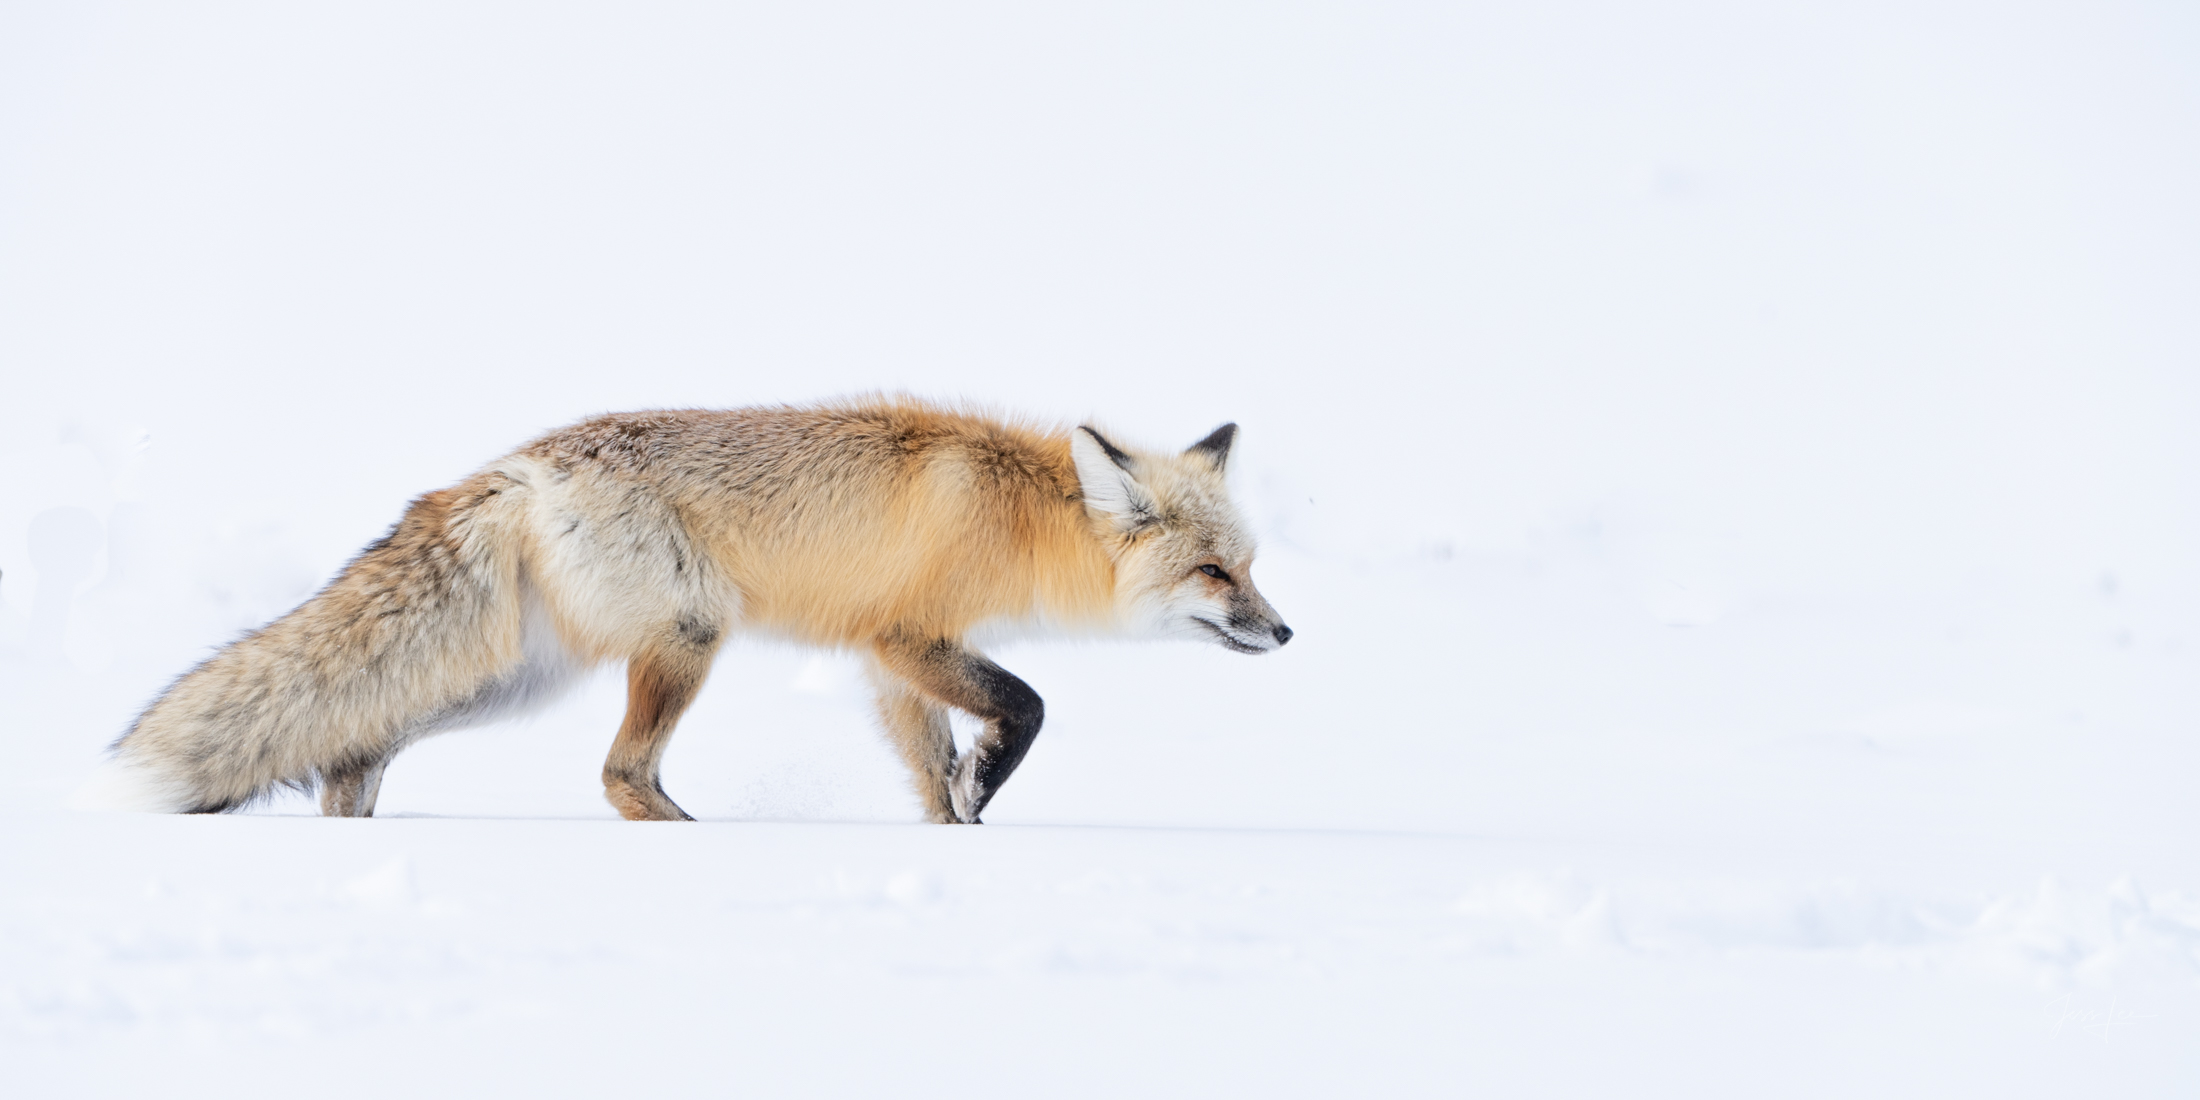 Fox Photo 21 is presented in Limited Edition of 250 Exclusive high-resolution Museum Quality Fine Art Prints. Wildlife Photo...